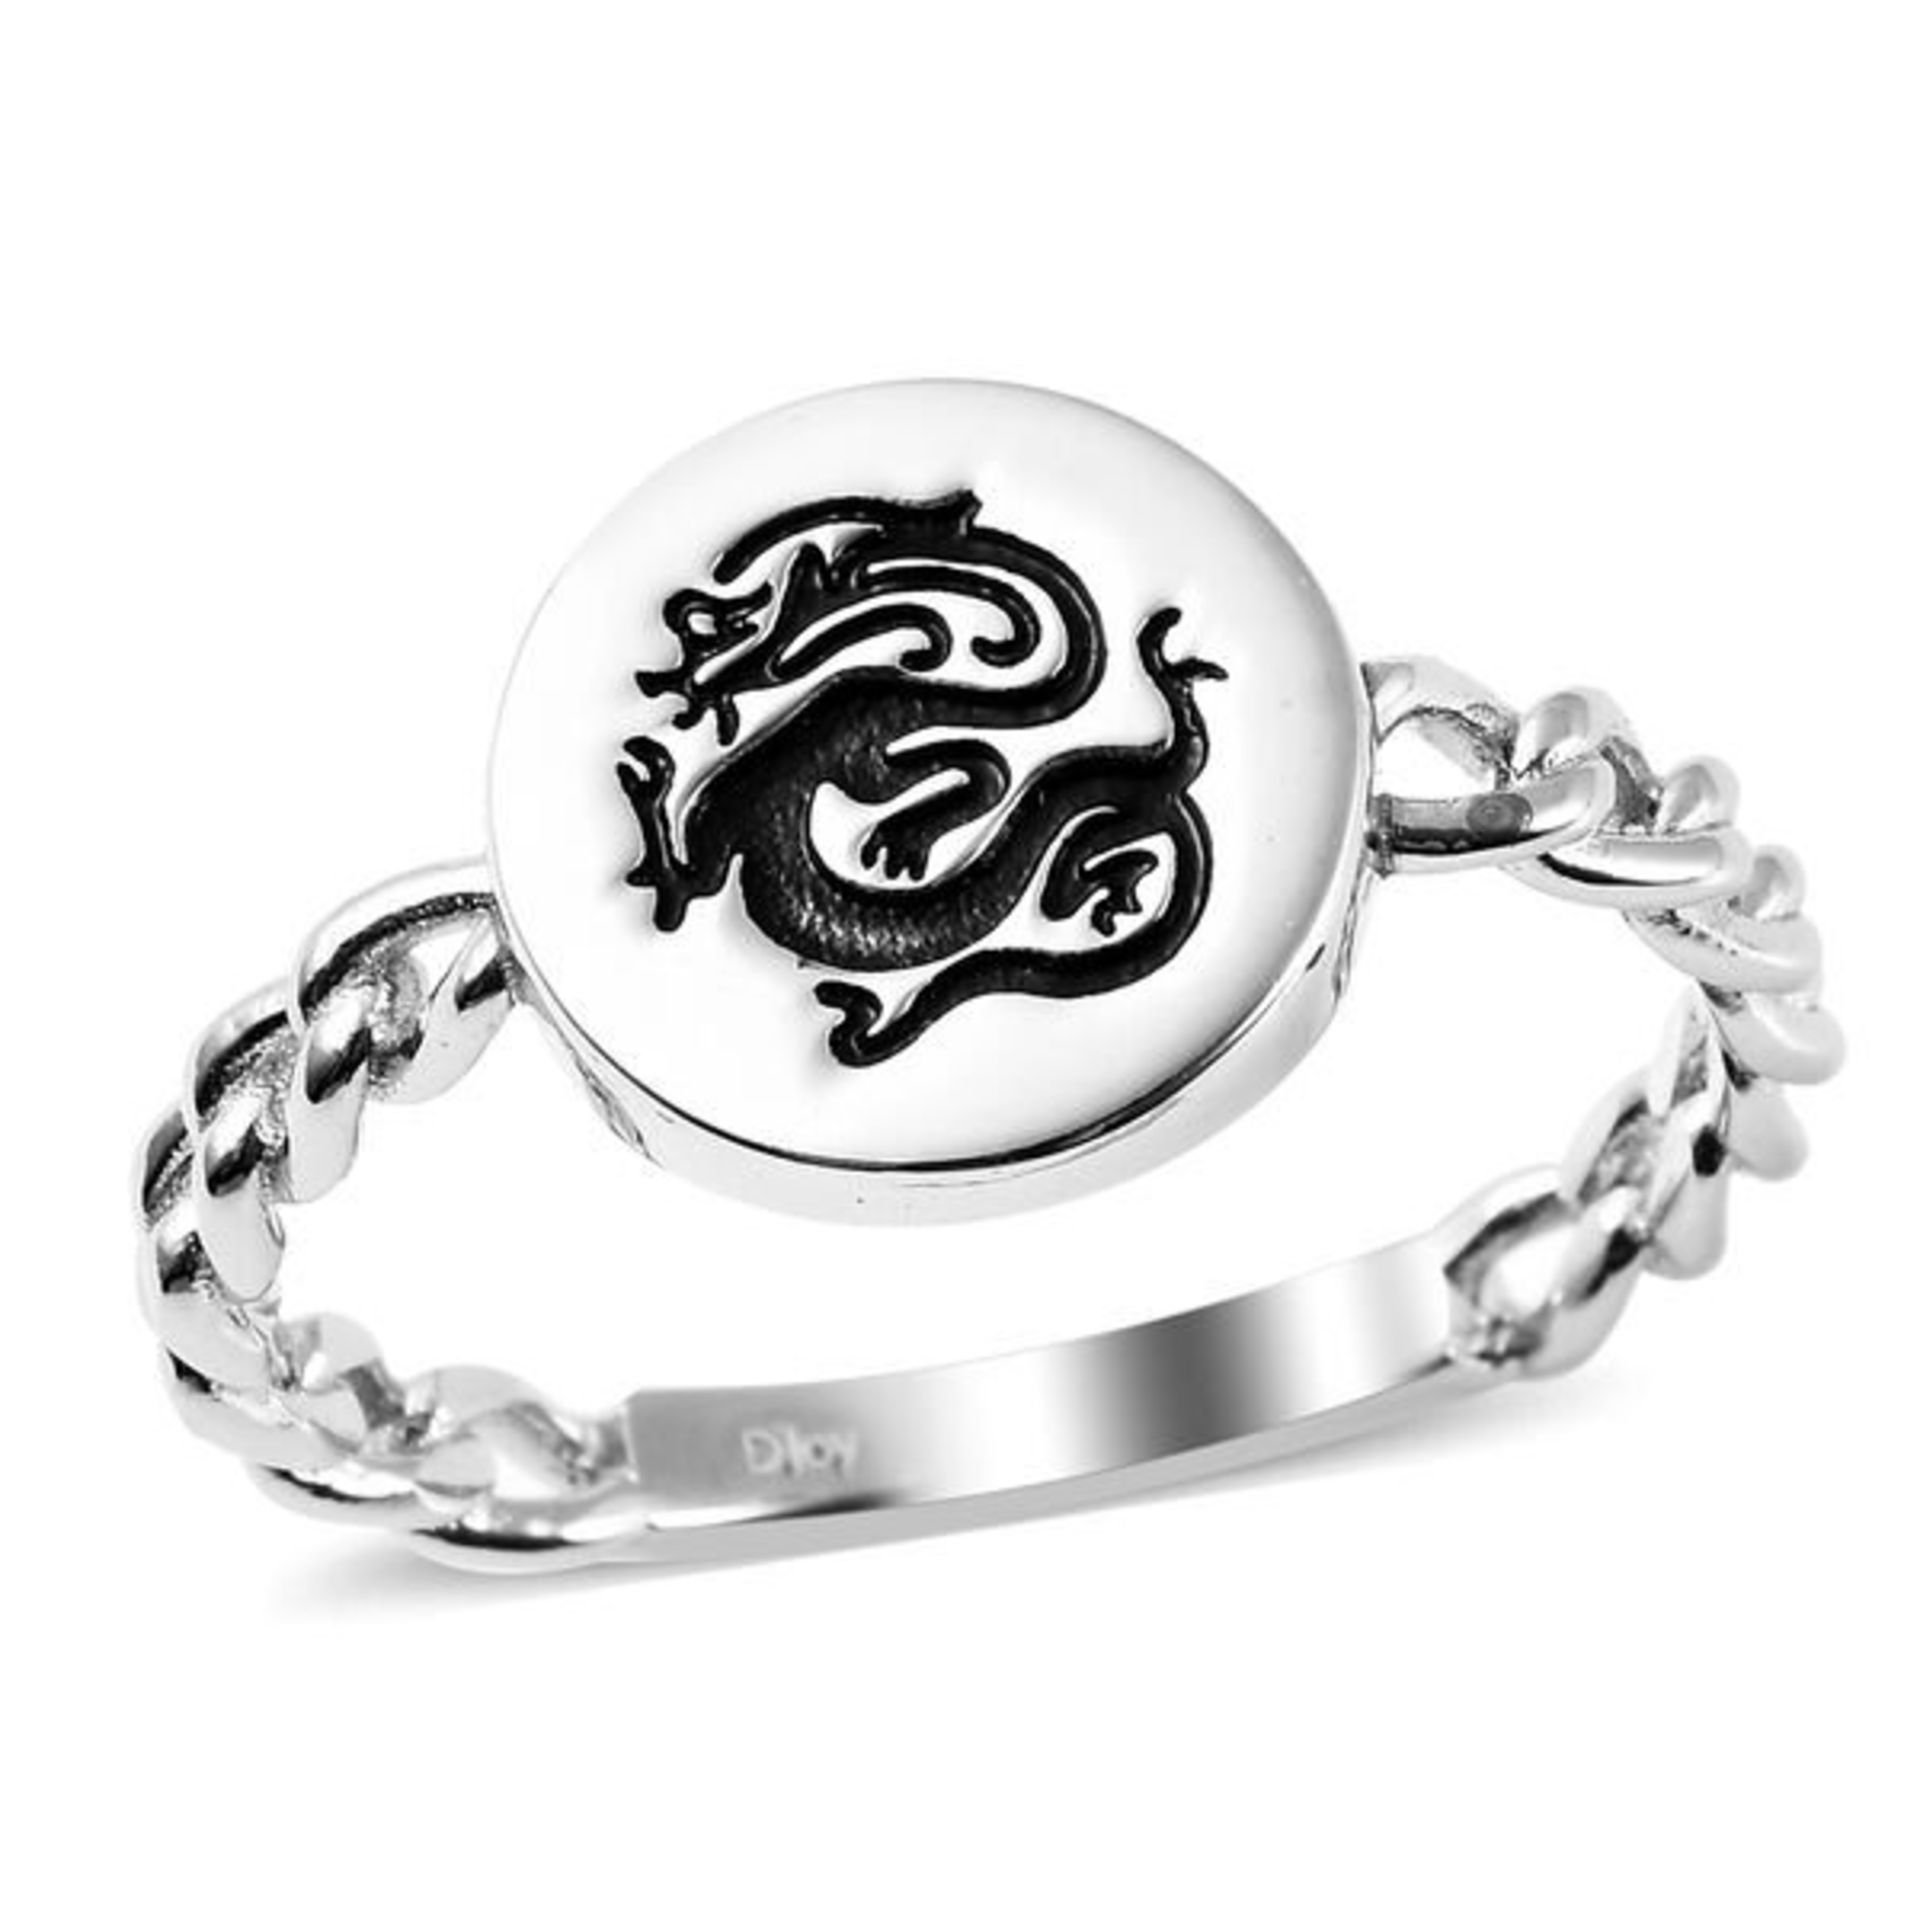 New! Sterling Silver Dragon Signet Ring - Image 3 of 5